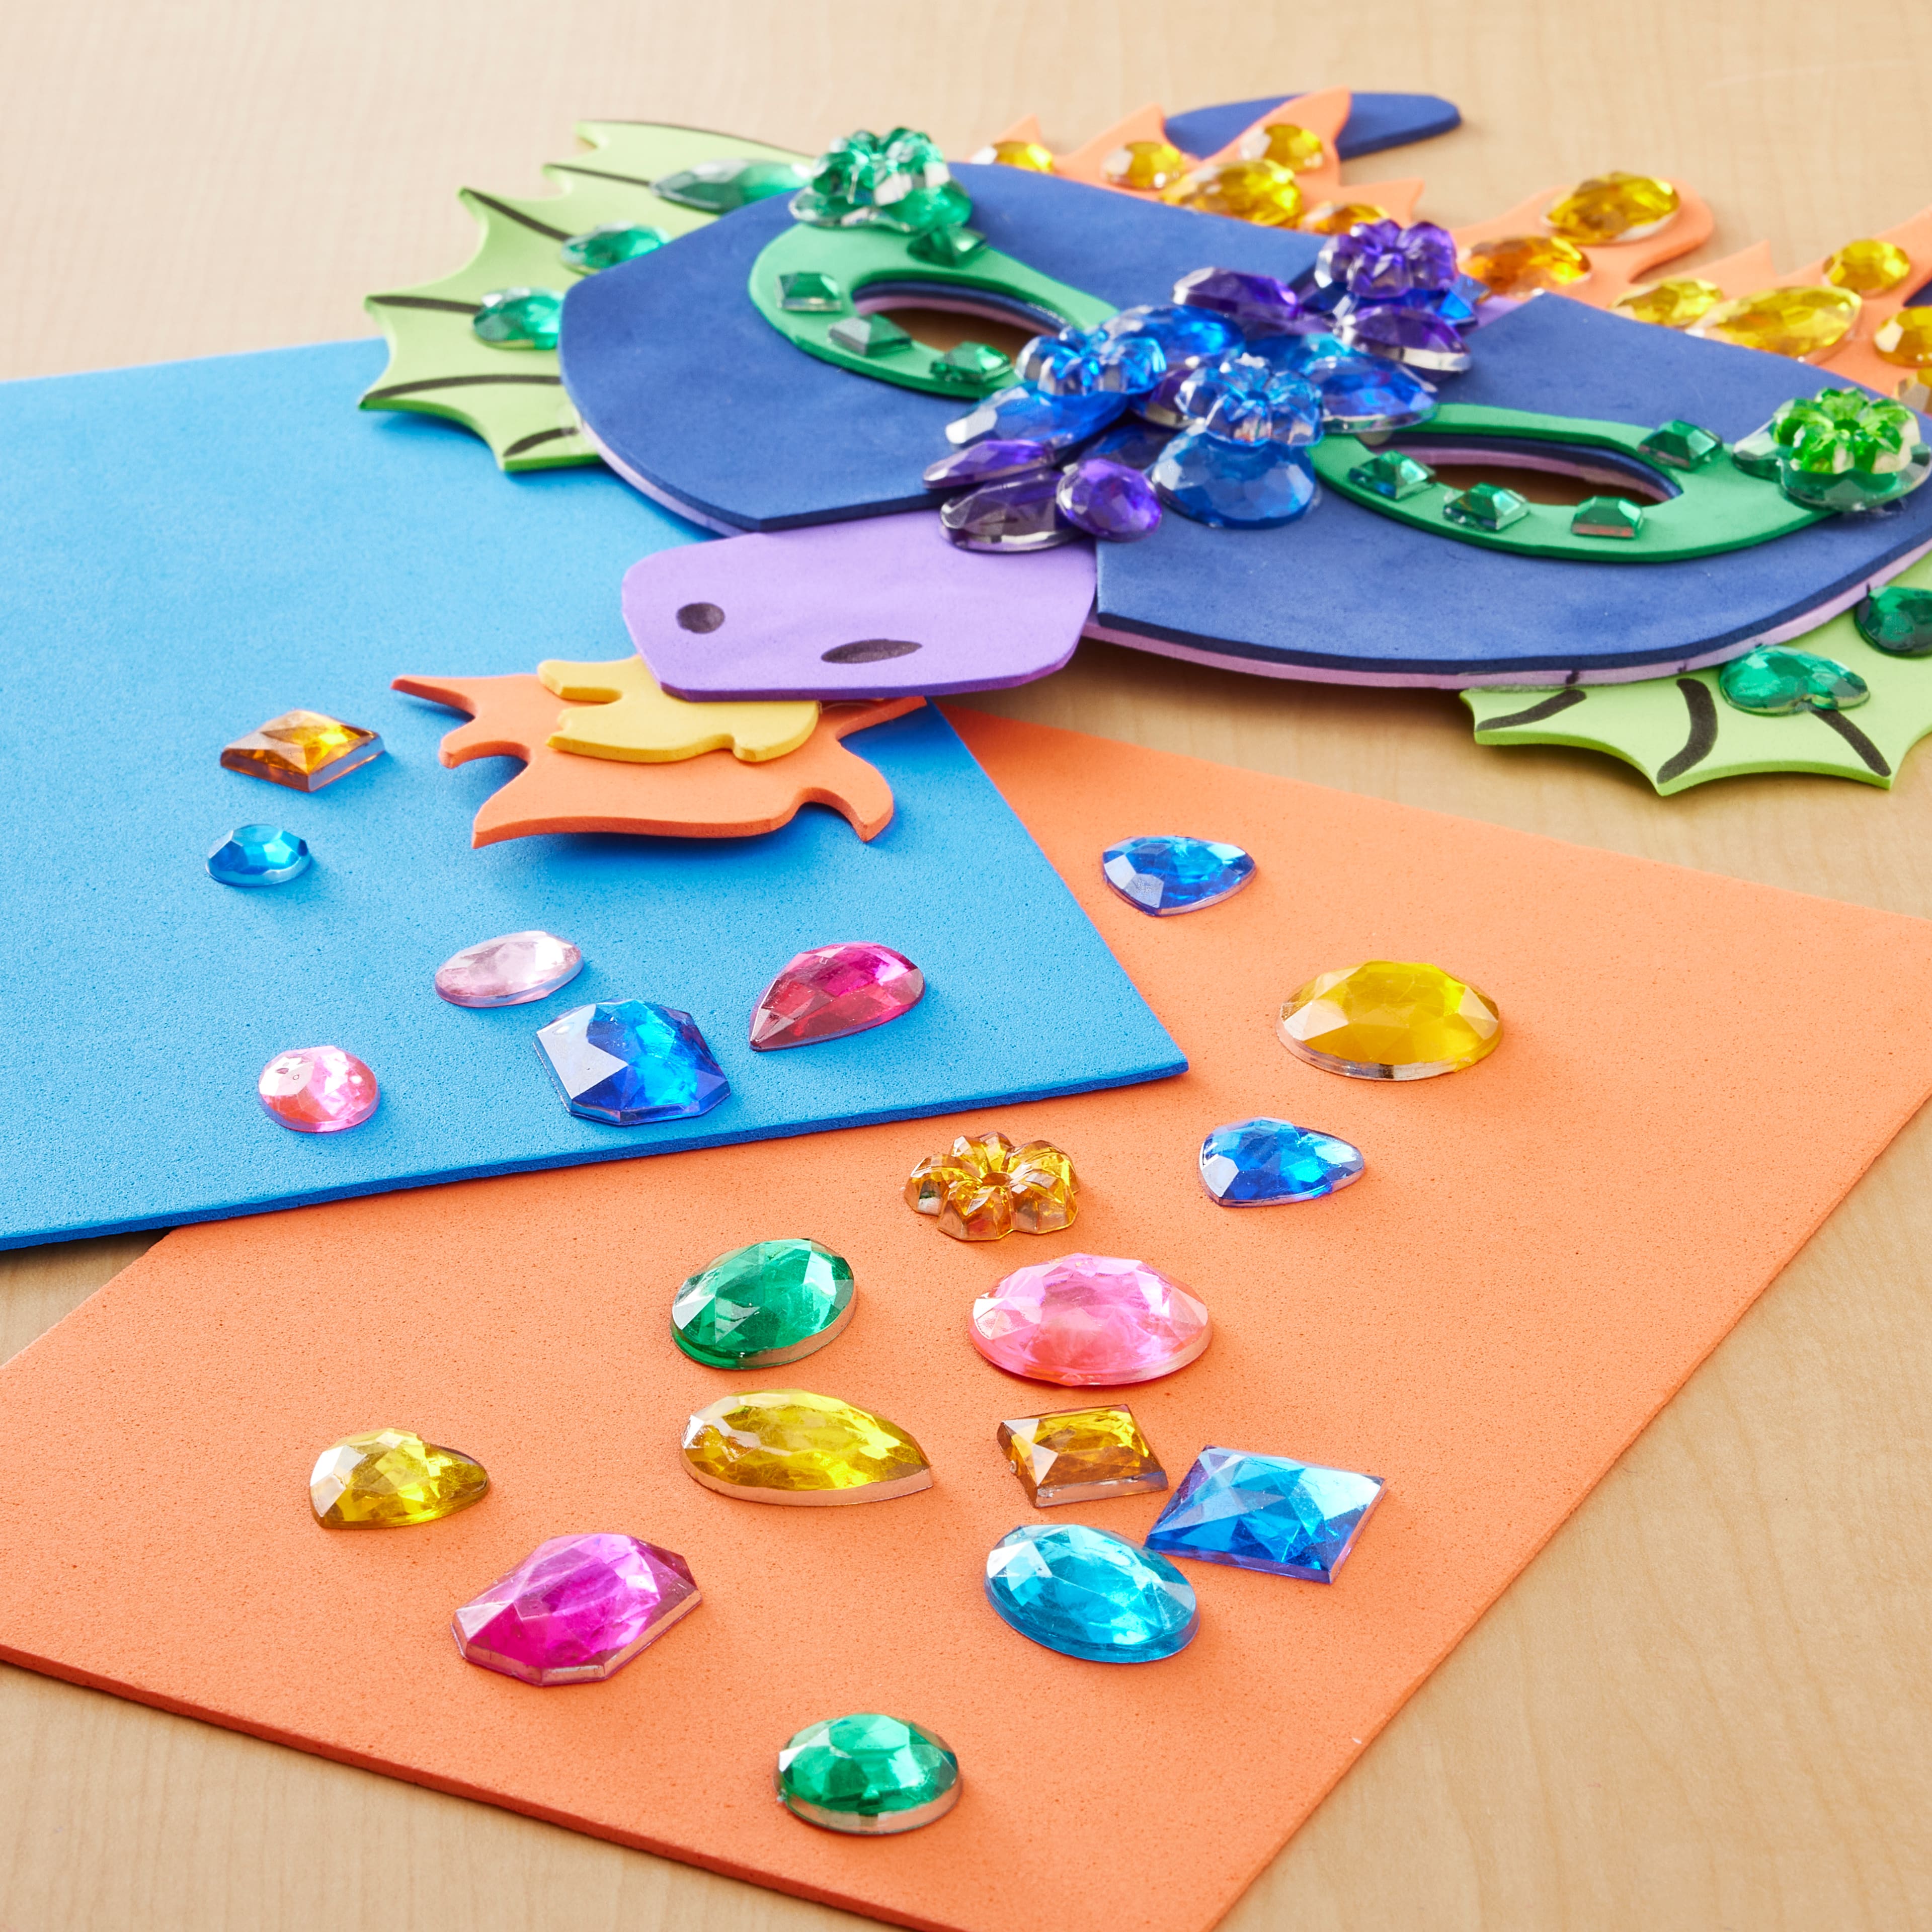 Urlax Arts and Crafts for Kids Ages 8-12 Make Your Own Gem